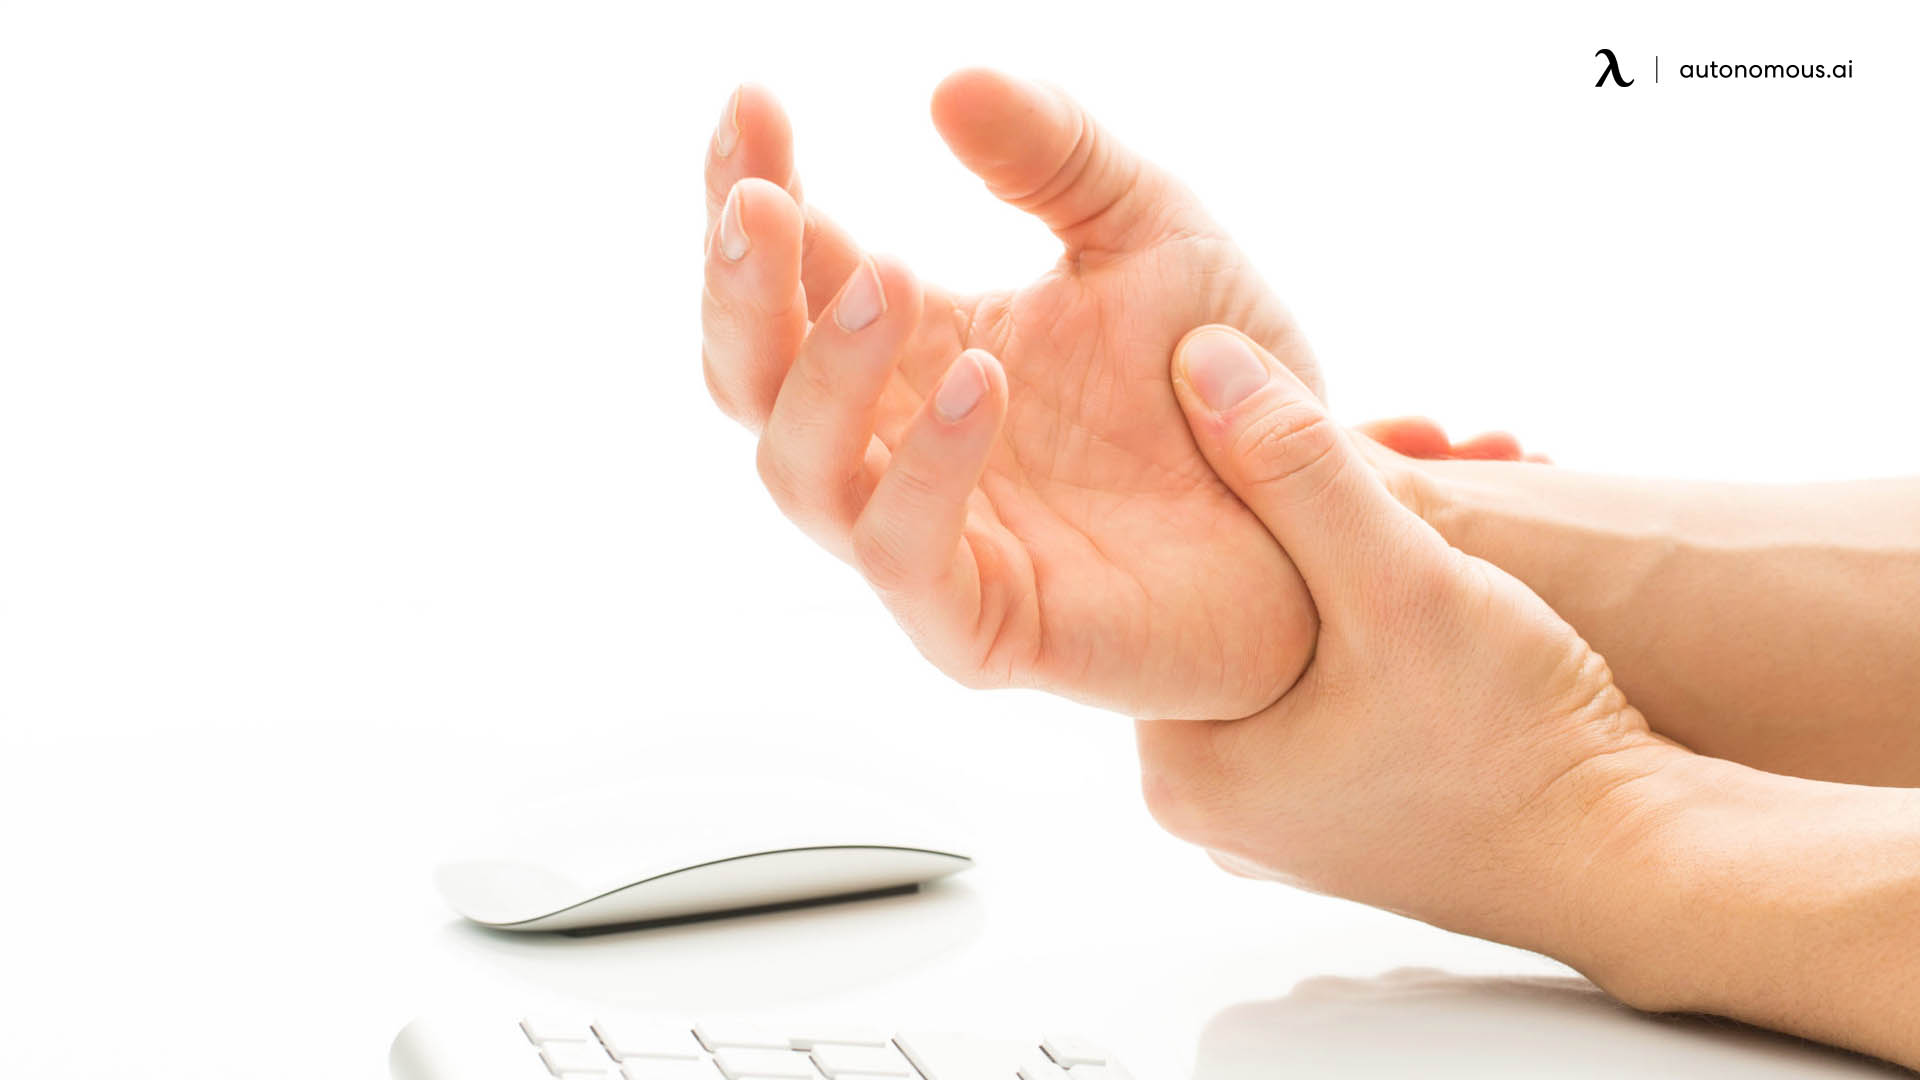 3 Ergonomic Solutions to Fight Thumb Pain